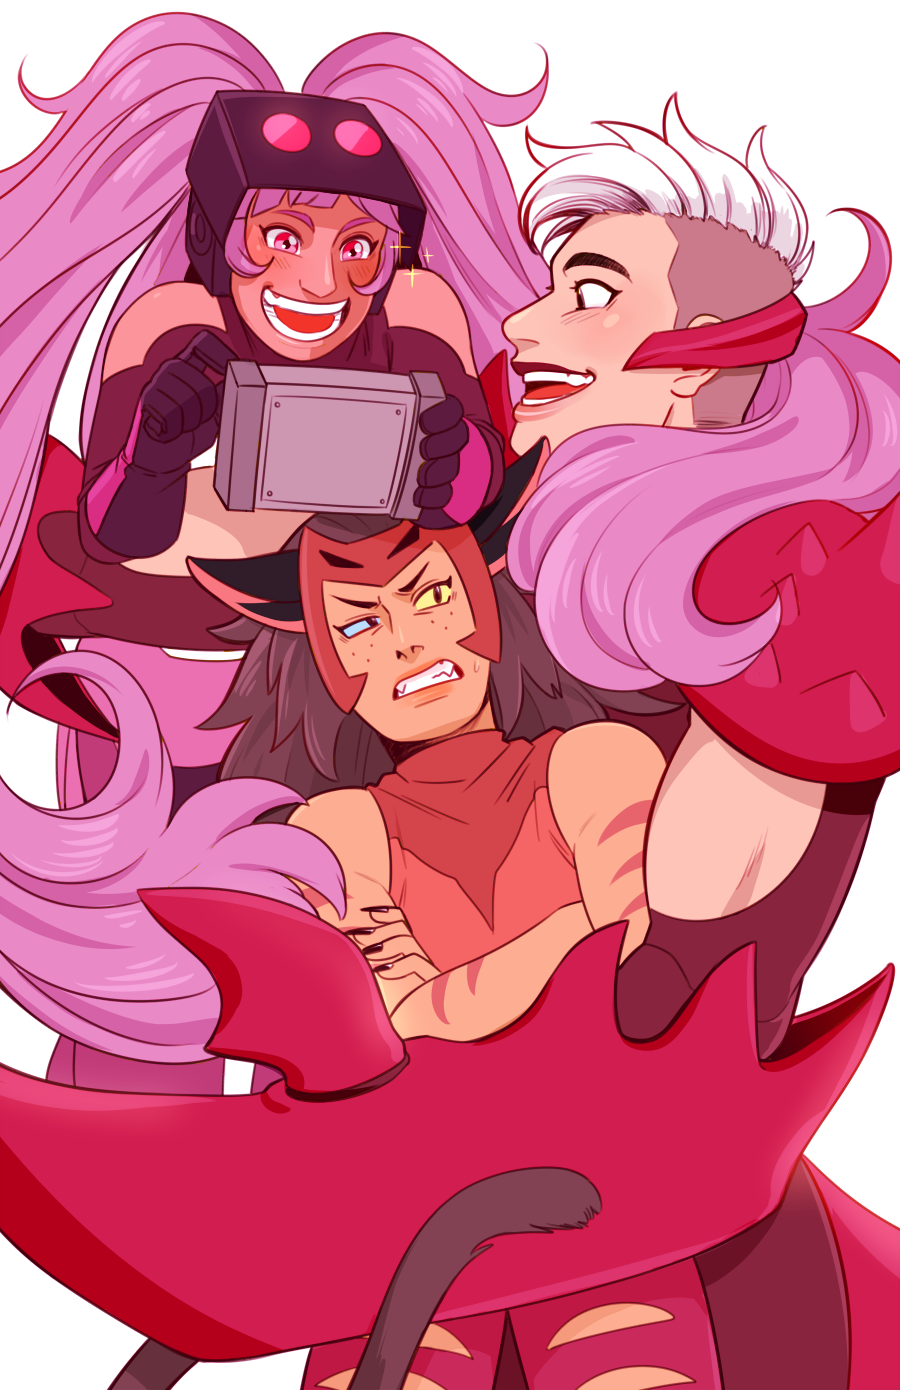 xuunies: The Trio for my Patreon fanart poll! SHE-RA was my winner for January. PATREON